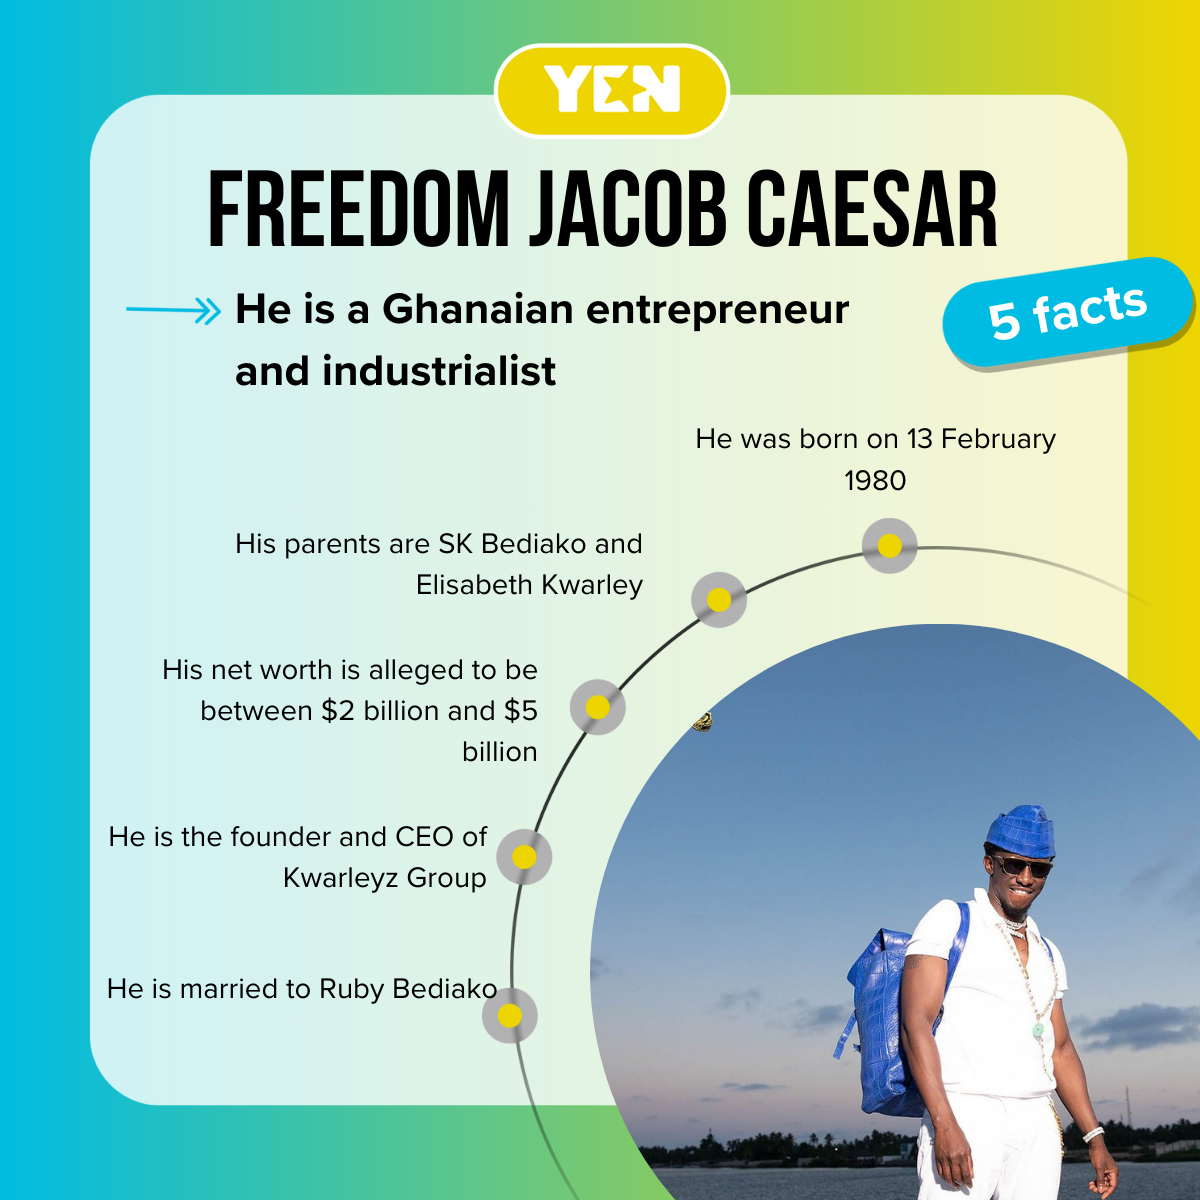 Facts about Freedom Jacob Caesar